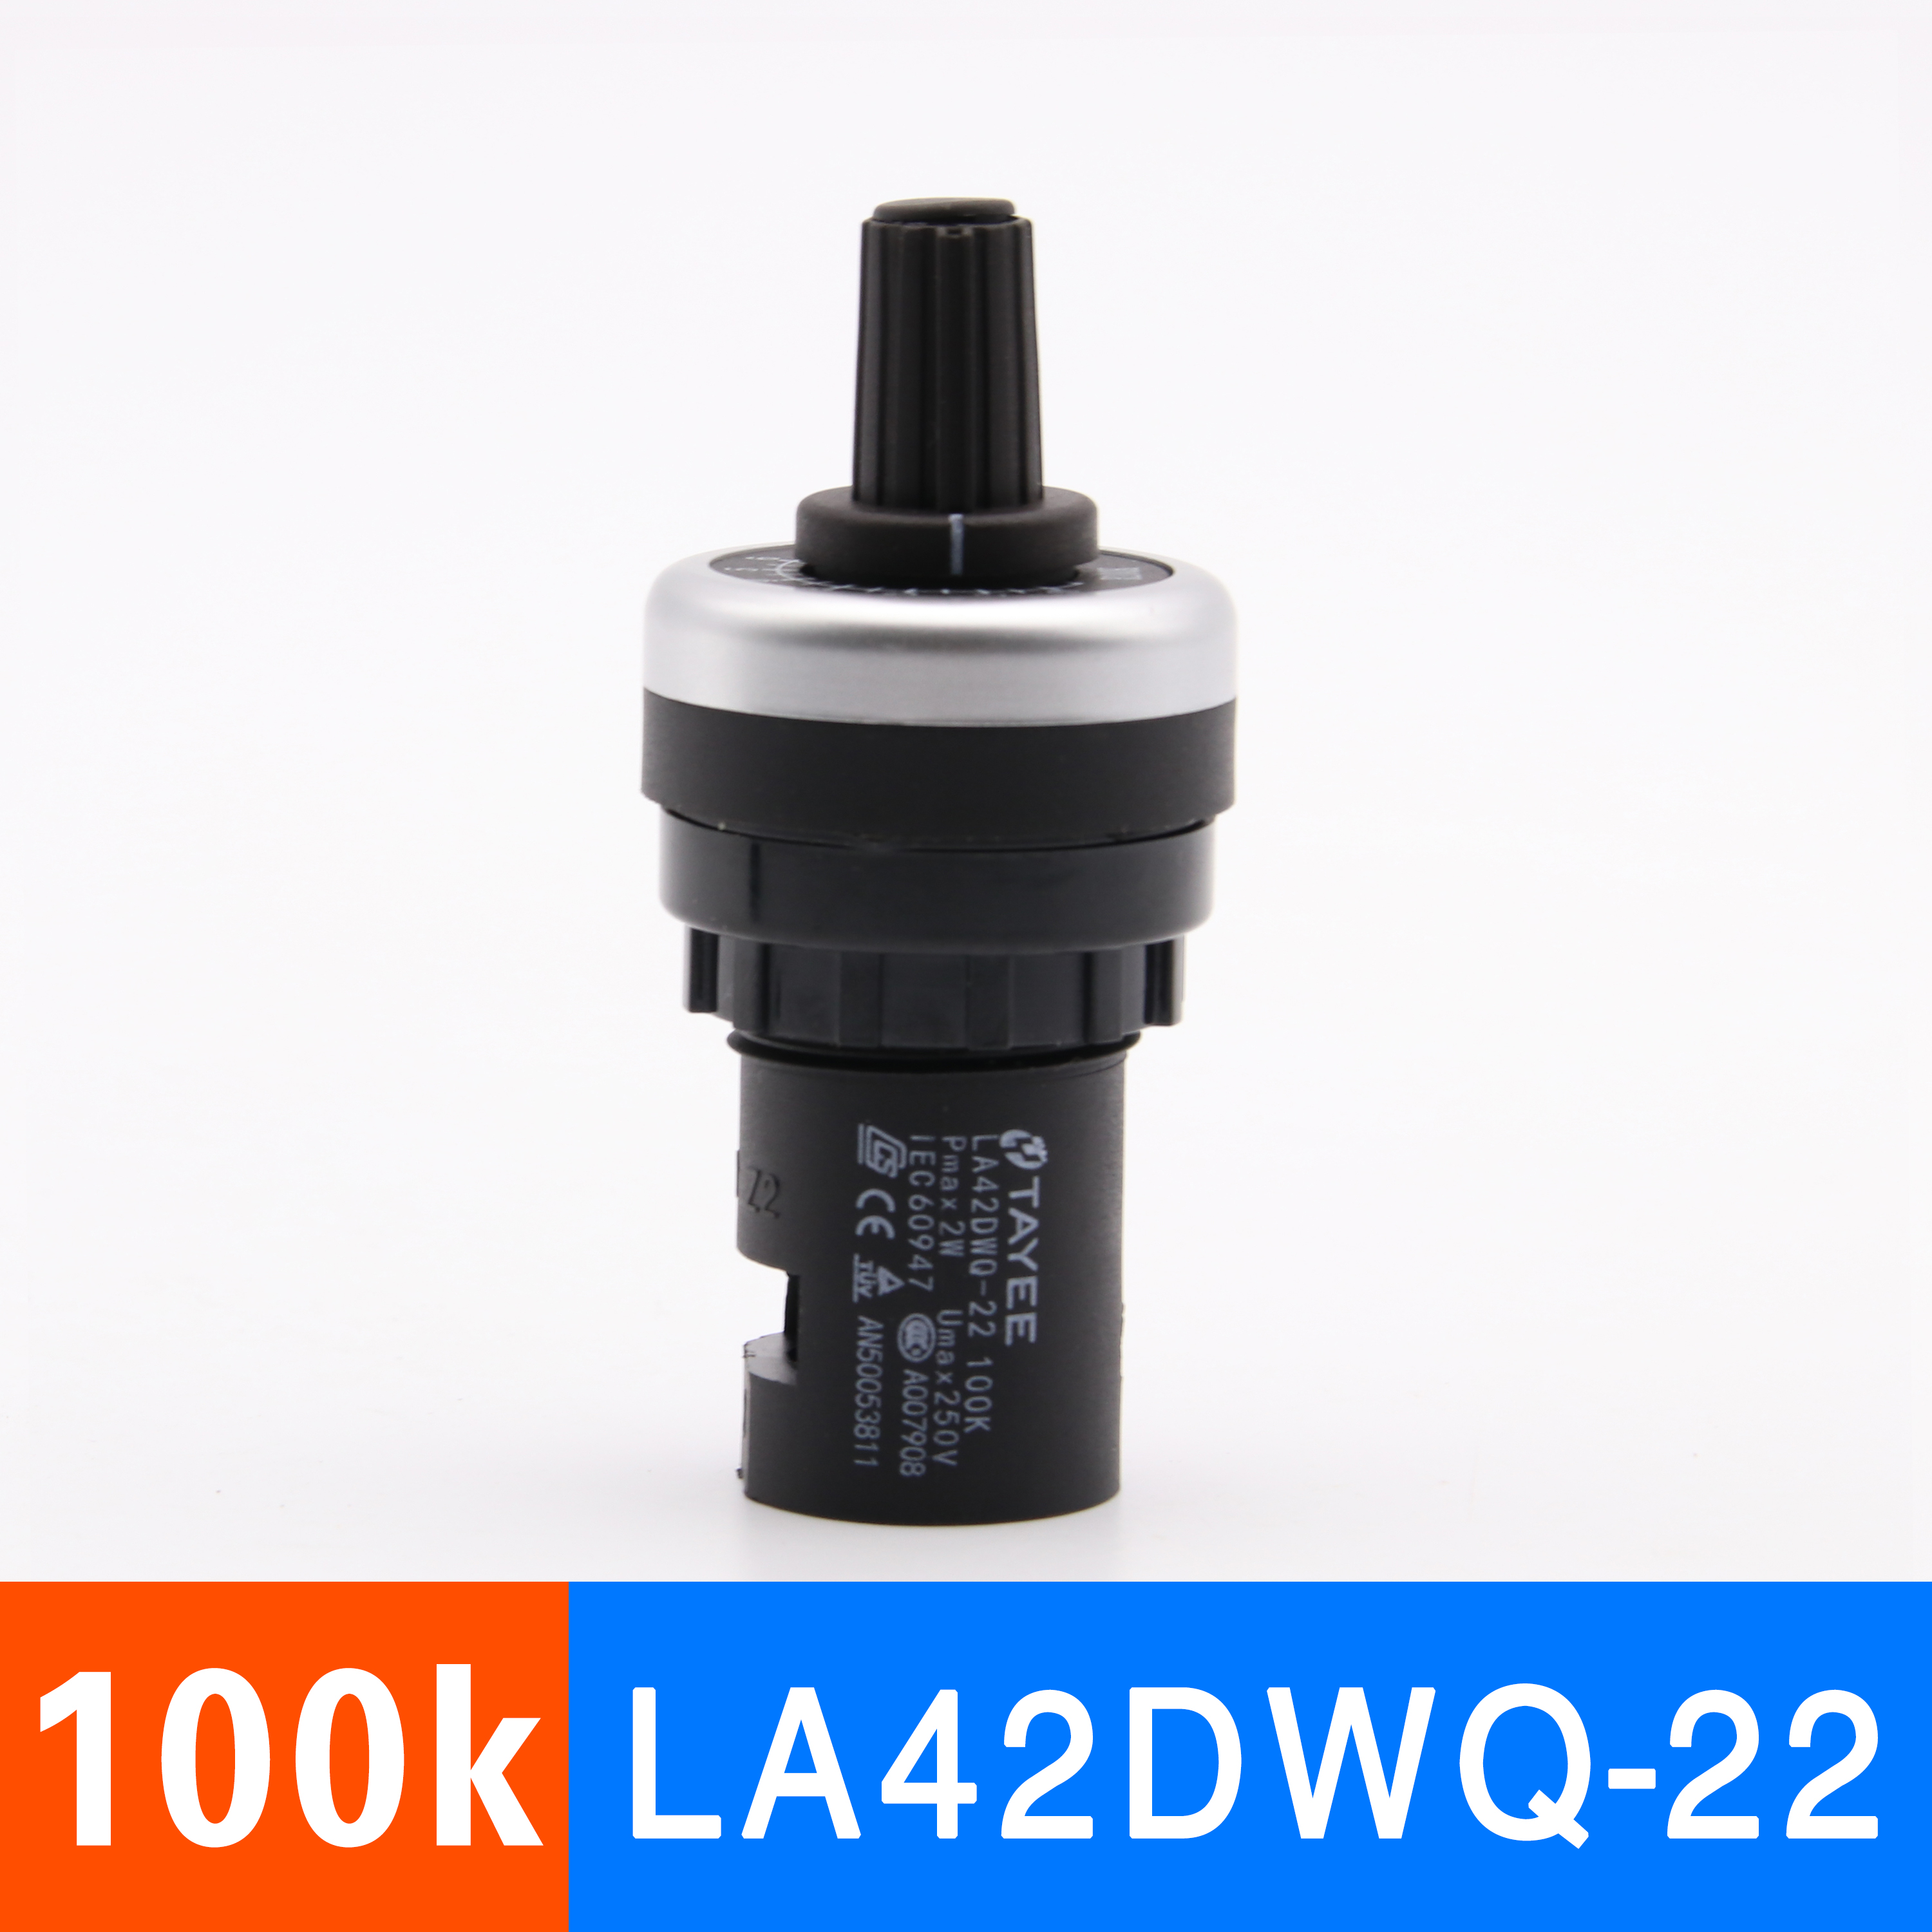 Genuine 100Kquality goods Shanghai Tianyi Frequency converter adjust speed potentiometer precise LA42DWQ-22 governor 22mm5K10K